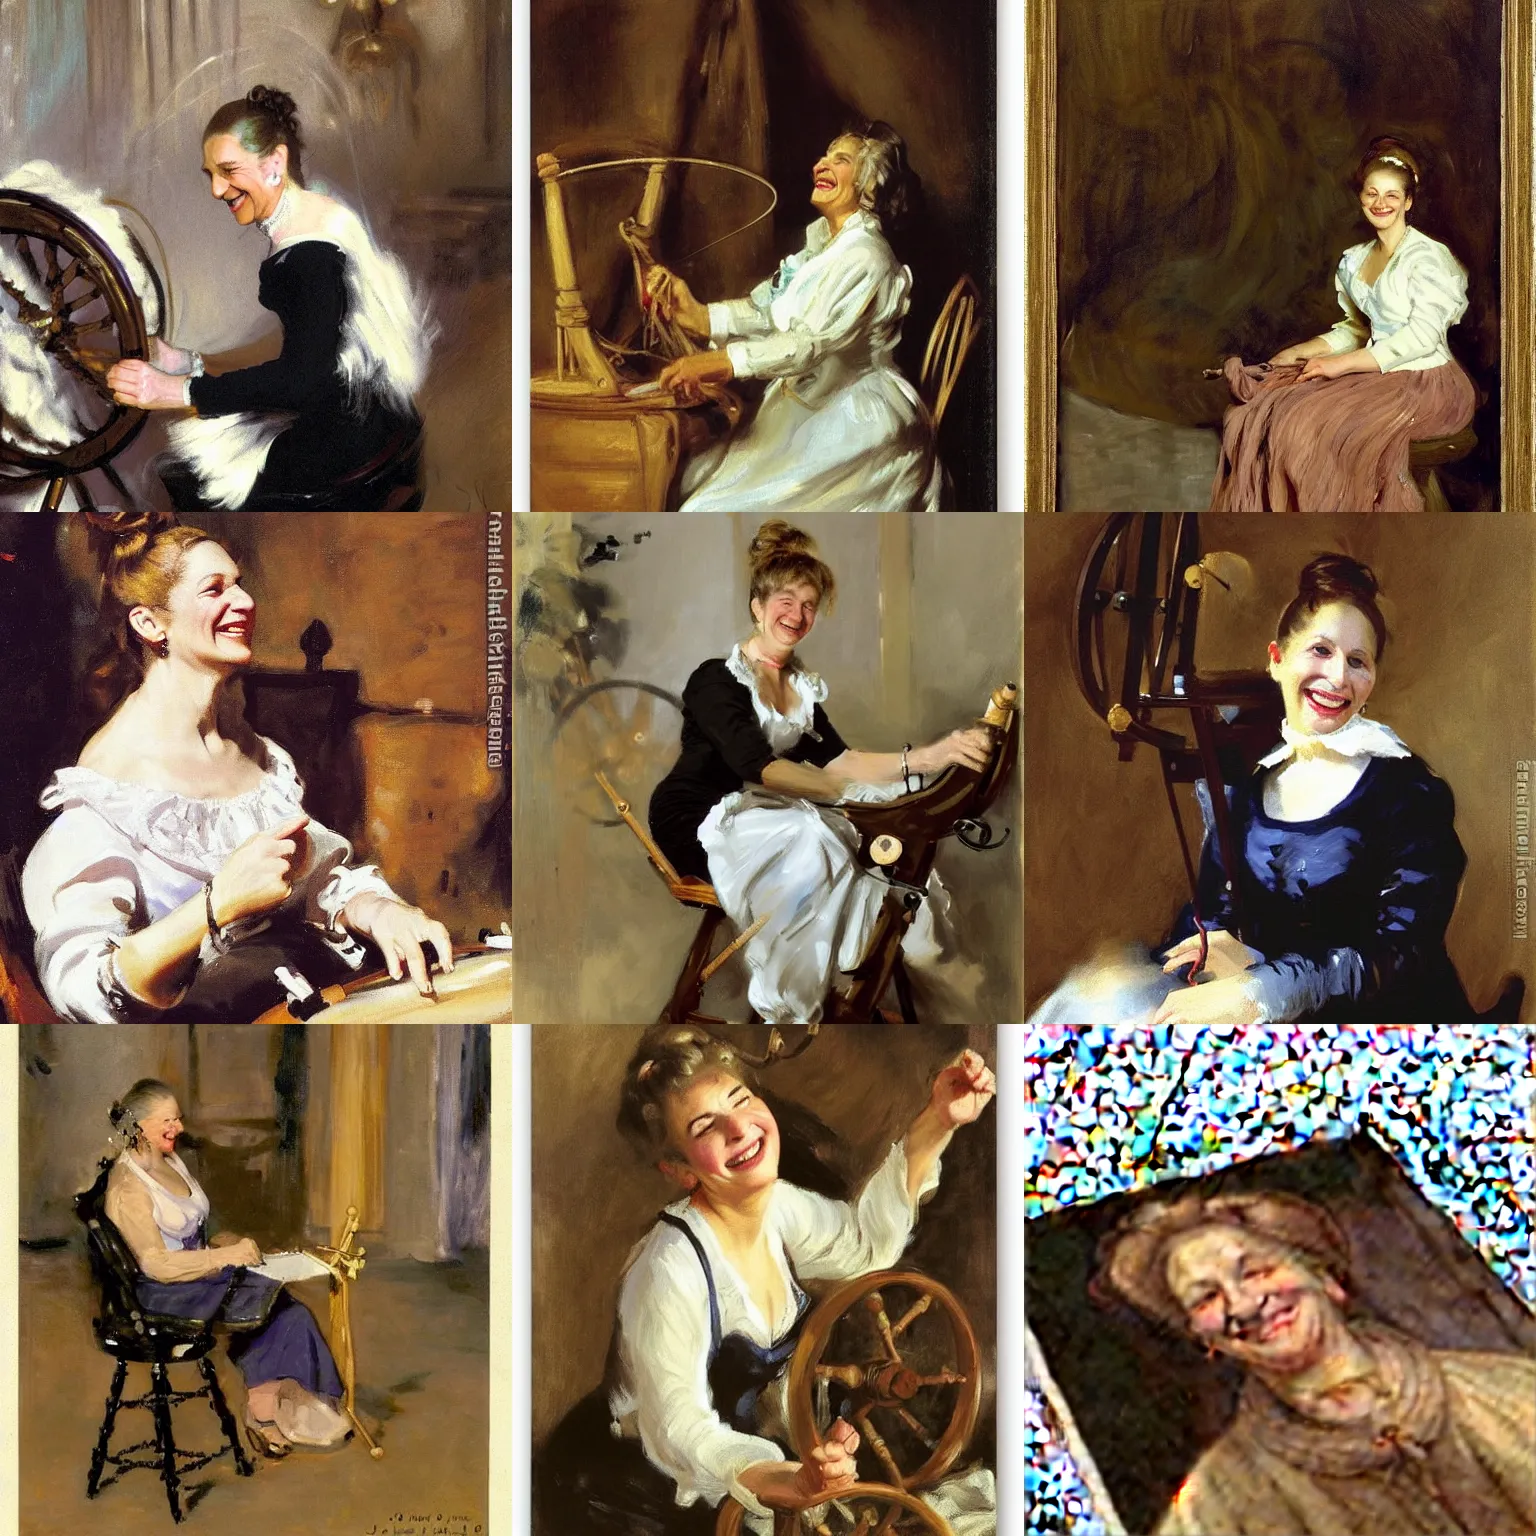 Prompt: A 50 year old stout woman with hair in a bun who looks like Barbara Streisand, is spinning yarn on a spinning wheel, smiling slightly, content, by john singer sargent